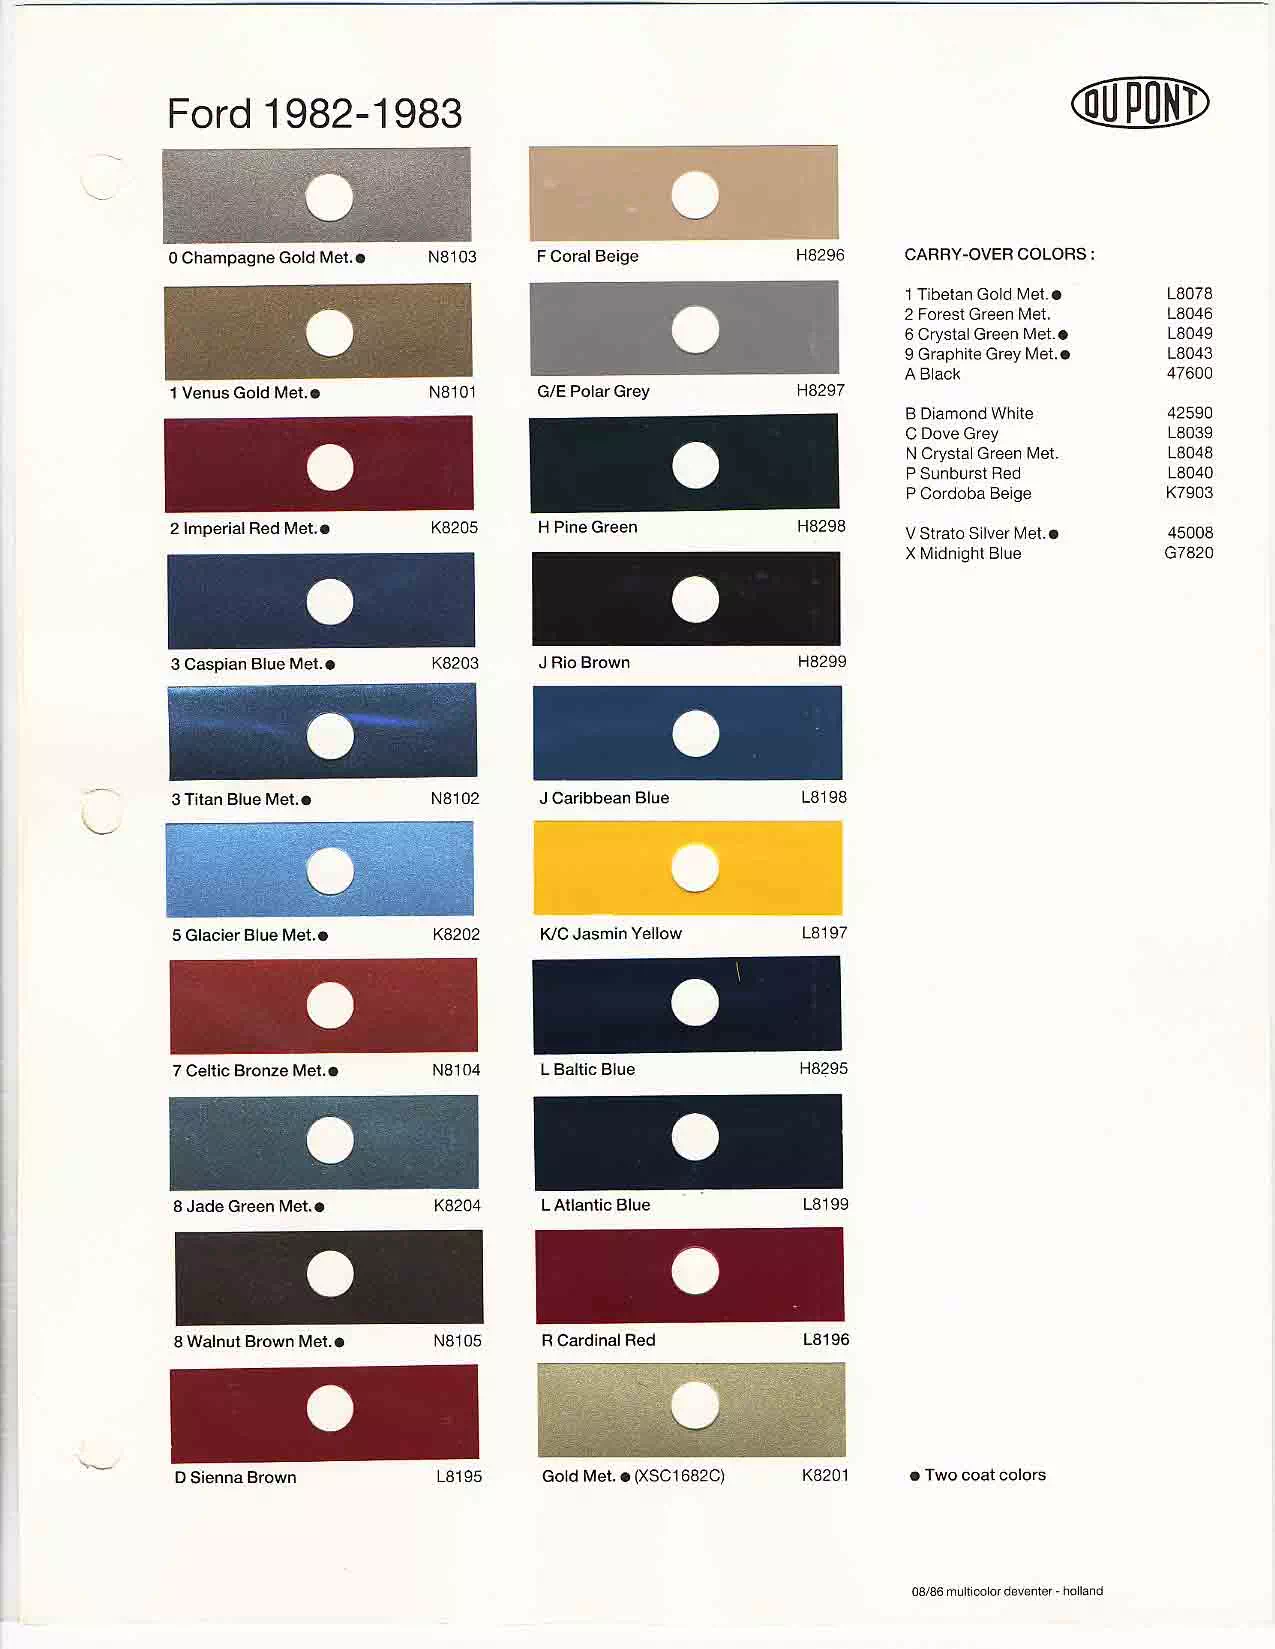 Colors and Codes used on Ford Euorpean Vehicles in 1982